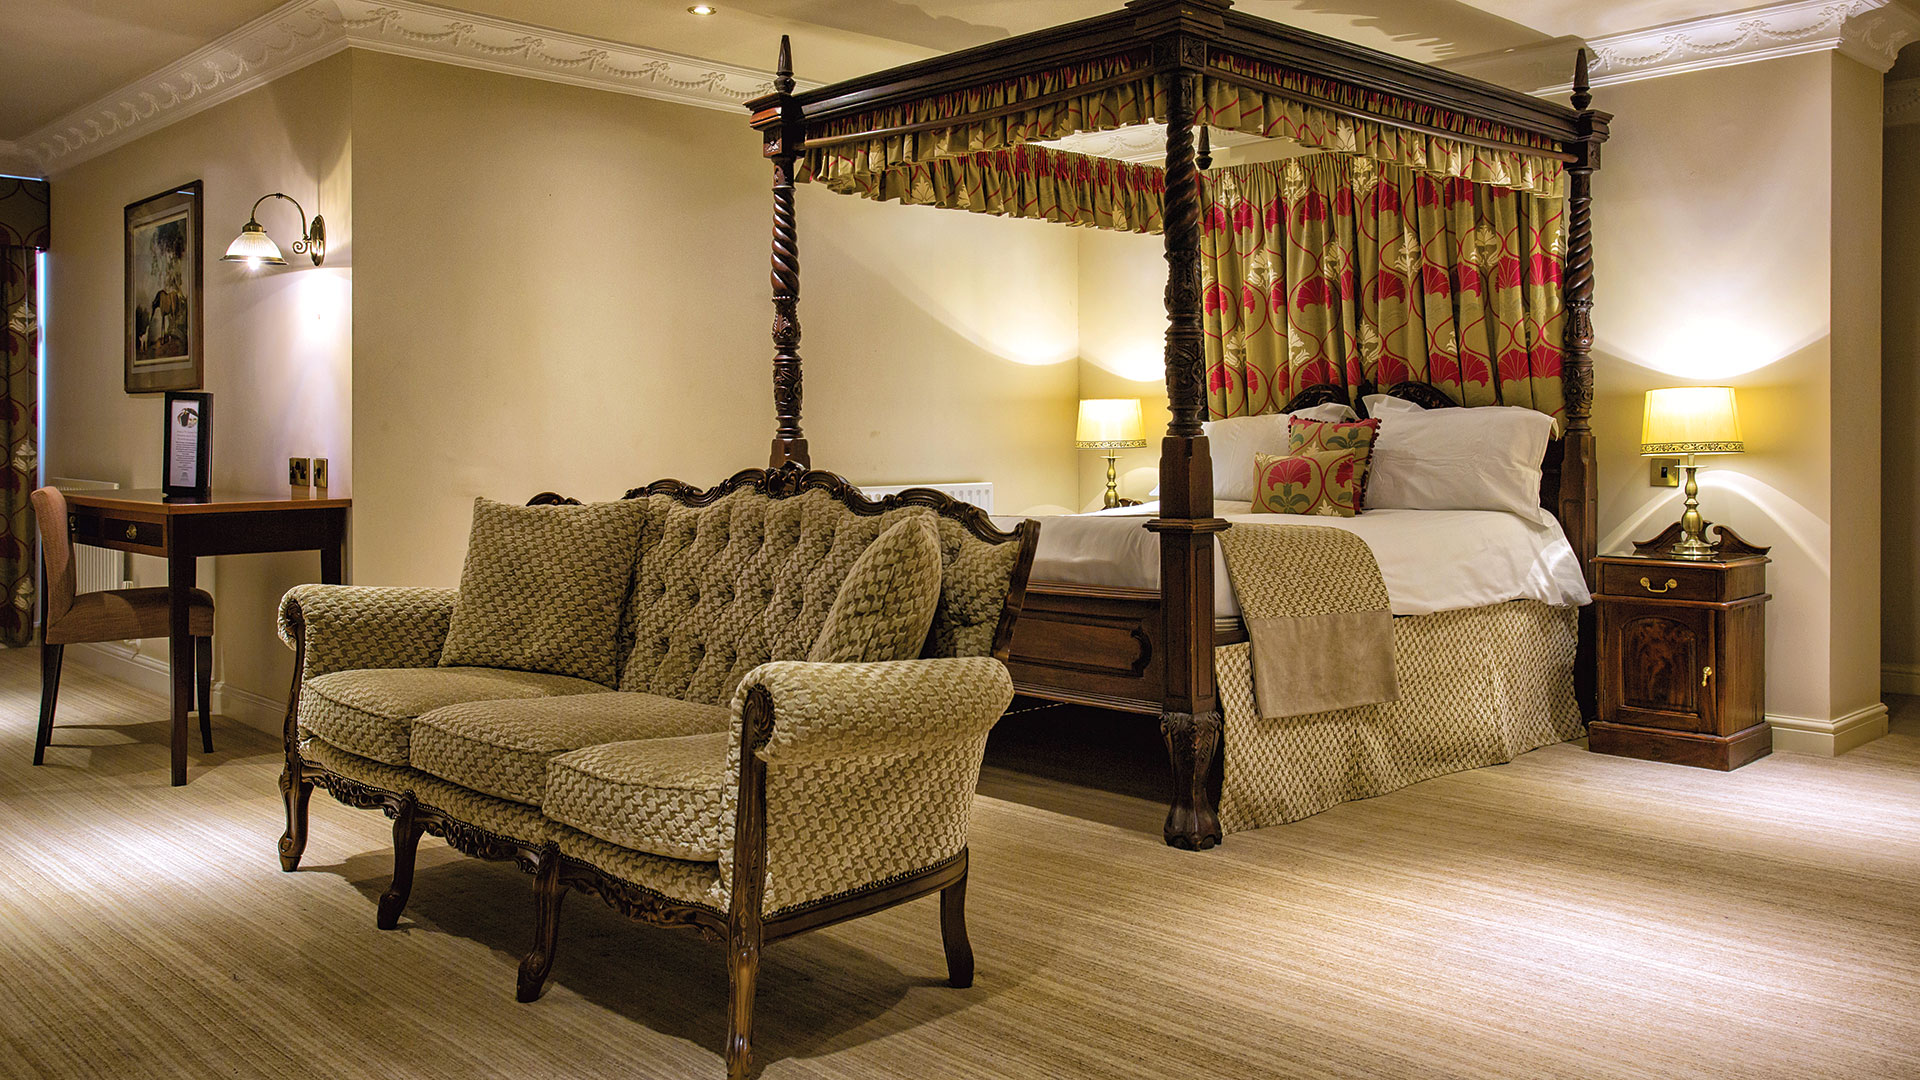 Four poster bed in a superior room - Waterton Park Hotel, Wakefield